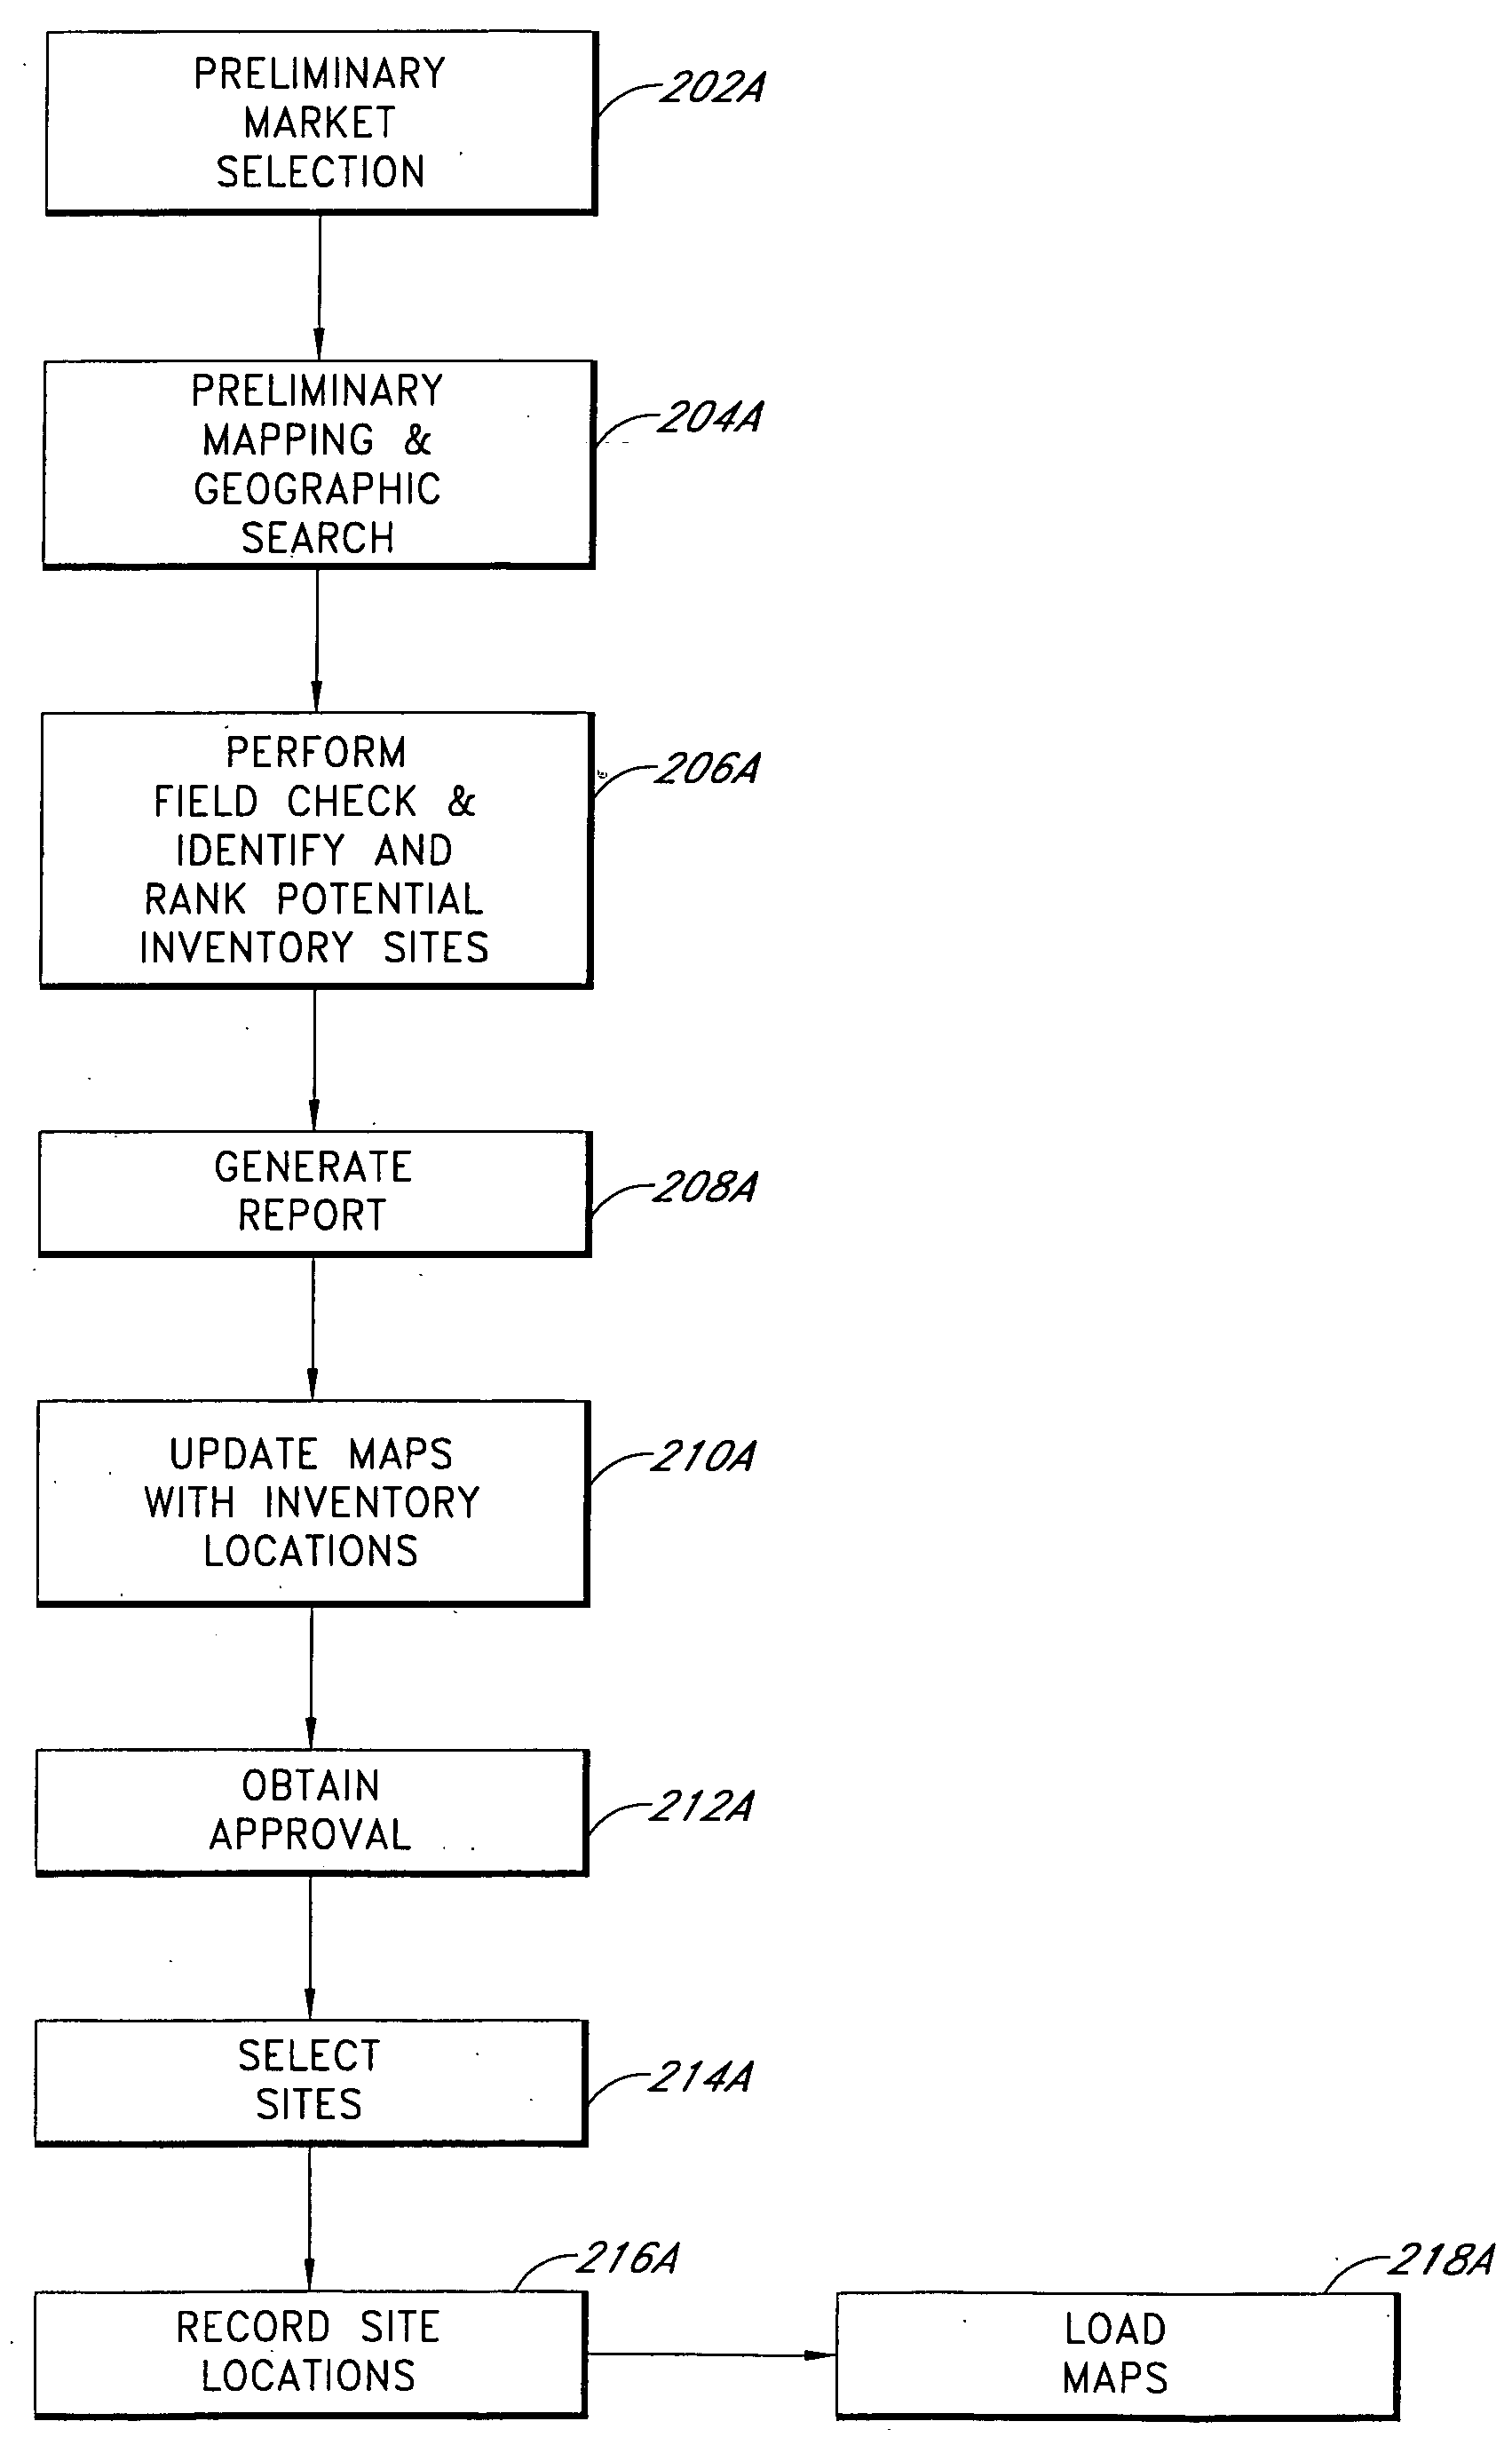 Apparatus and methods for reducing contaminants in water systems using information distribution